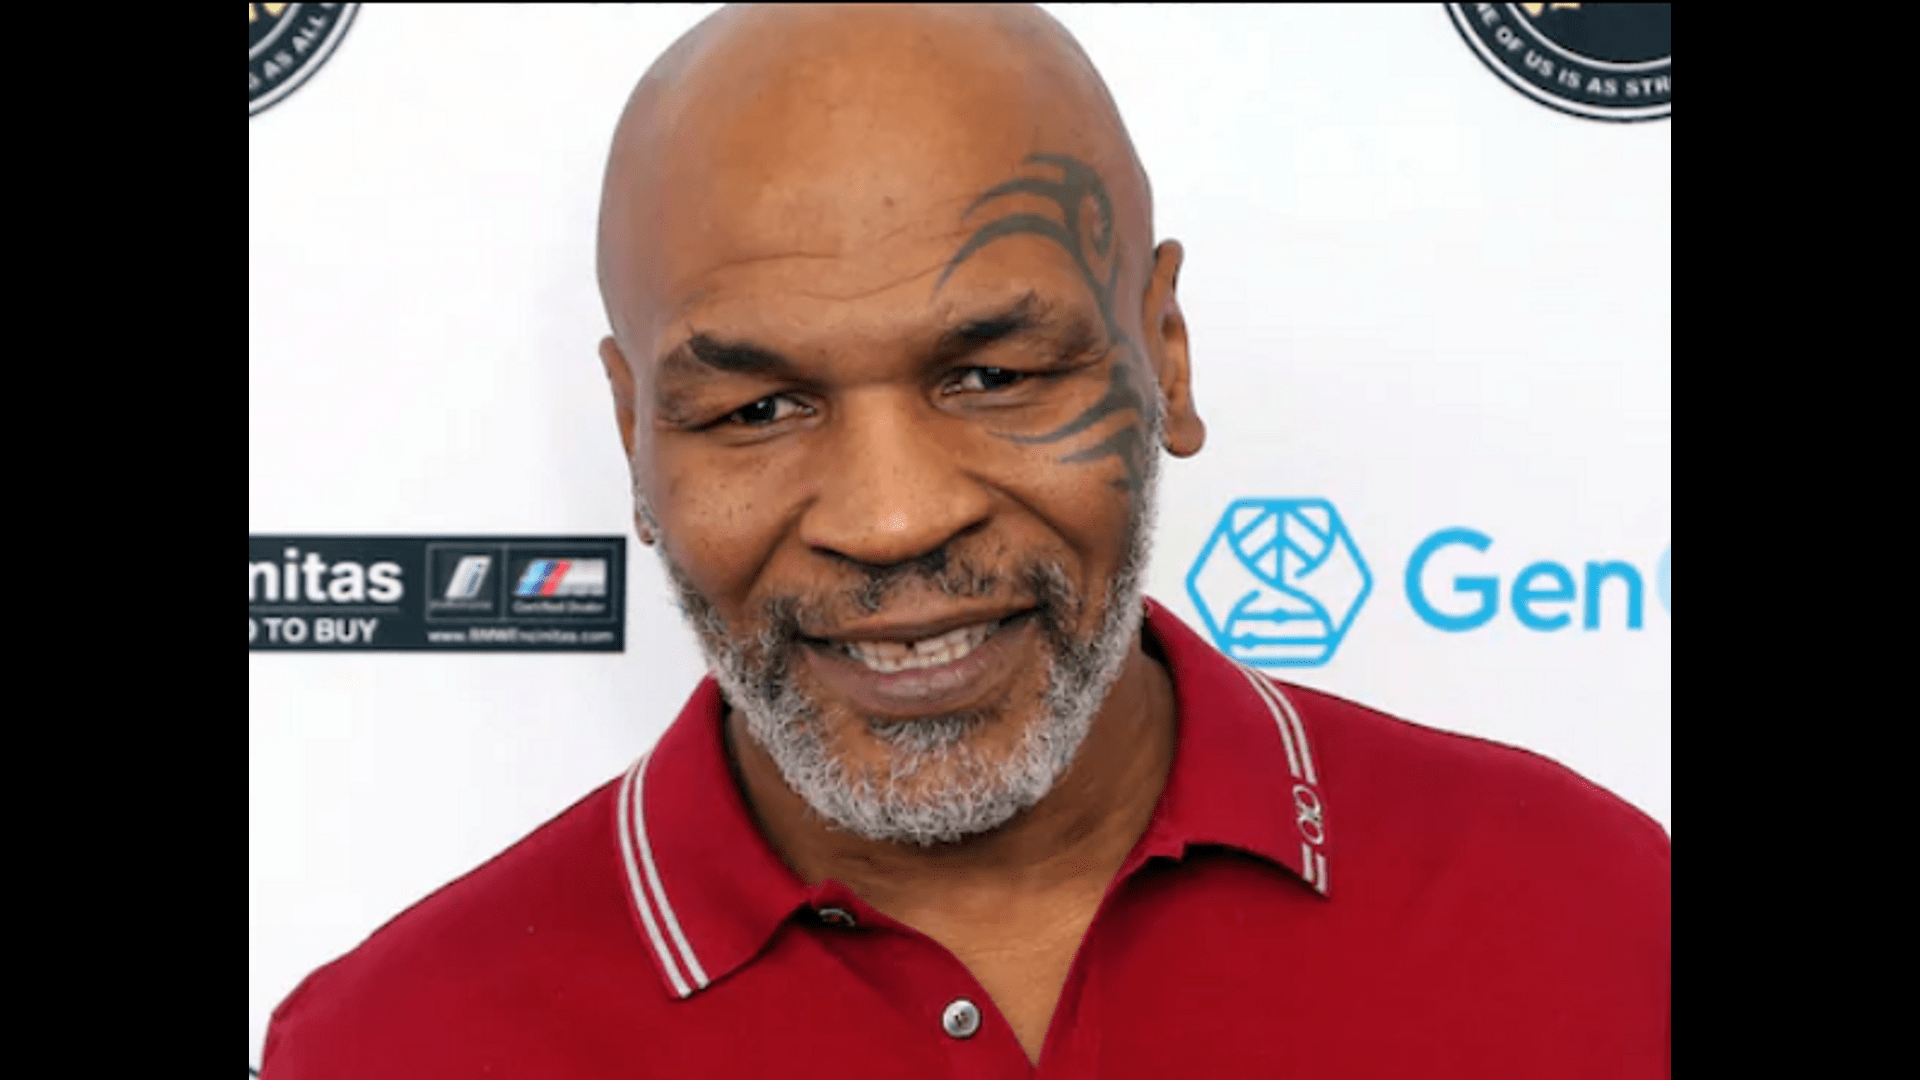 ”mike-tyson-hit-an-annoying-passenger-on-the-plane”